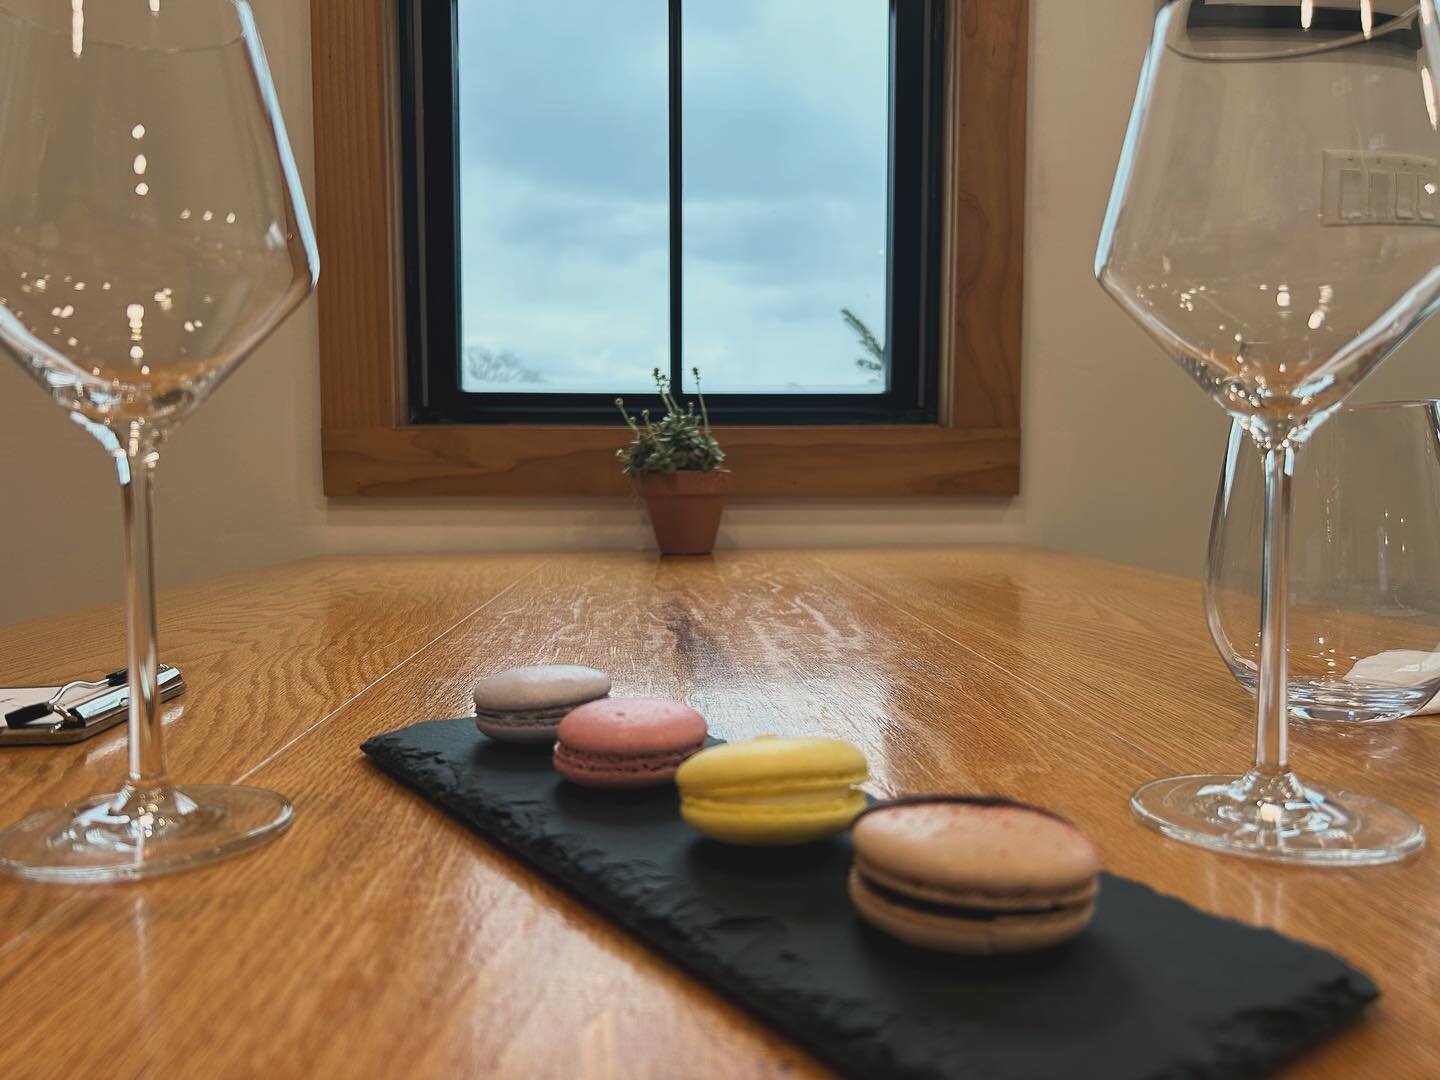 One of our favorite parts of being a small business is the opportunity to collaborate with other small businesses. Each February we partner with Dani and Coleman at @ps_macarons to create delicious wine and macaron pairings for our guests to enjoy he